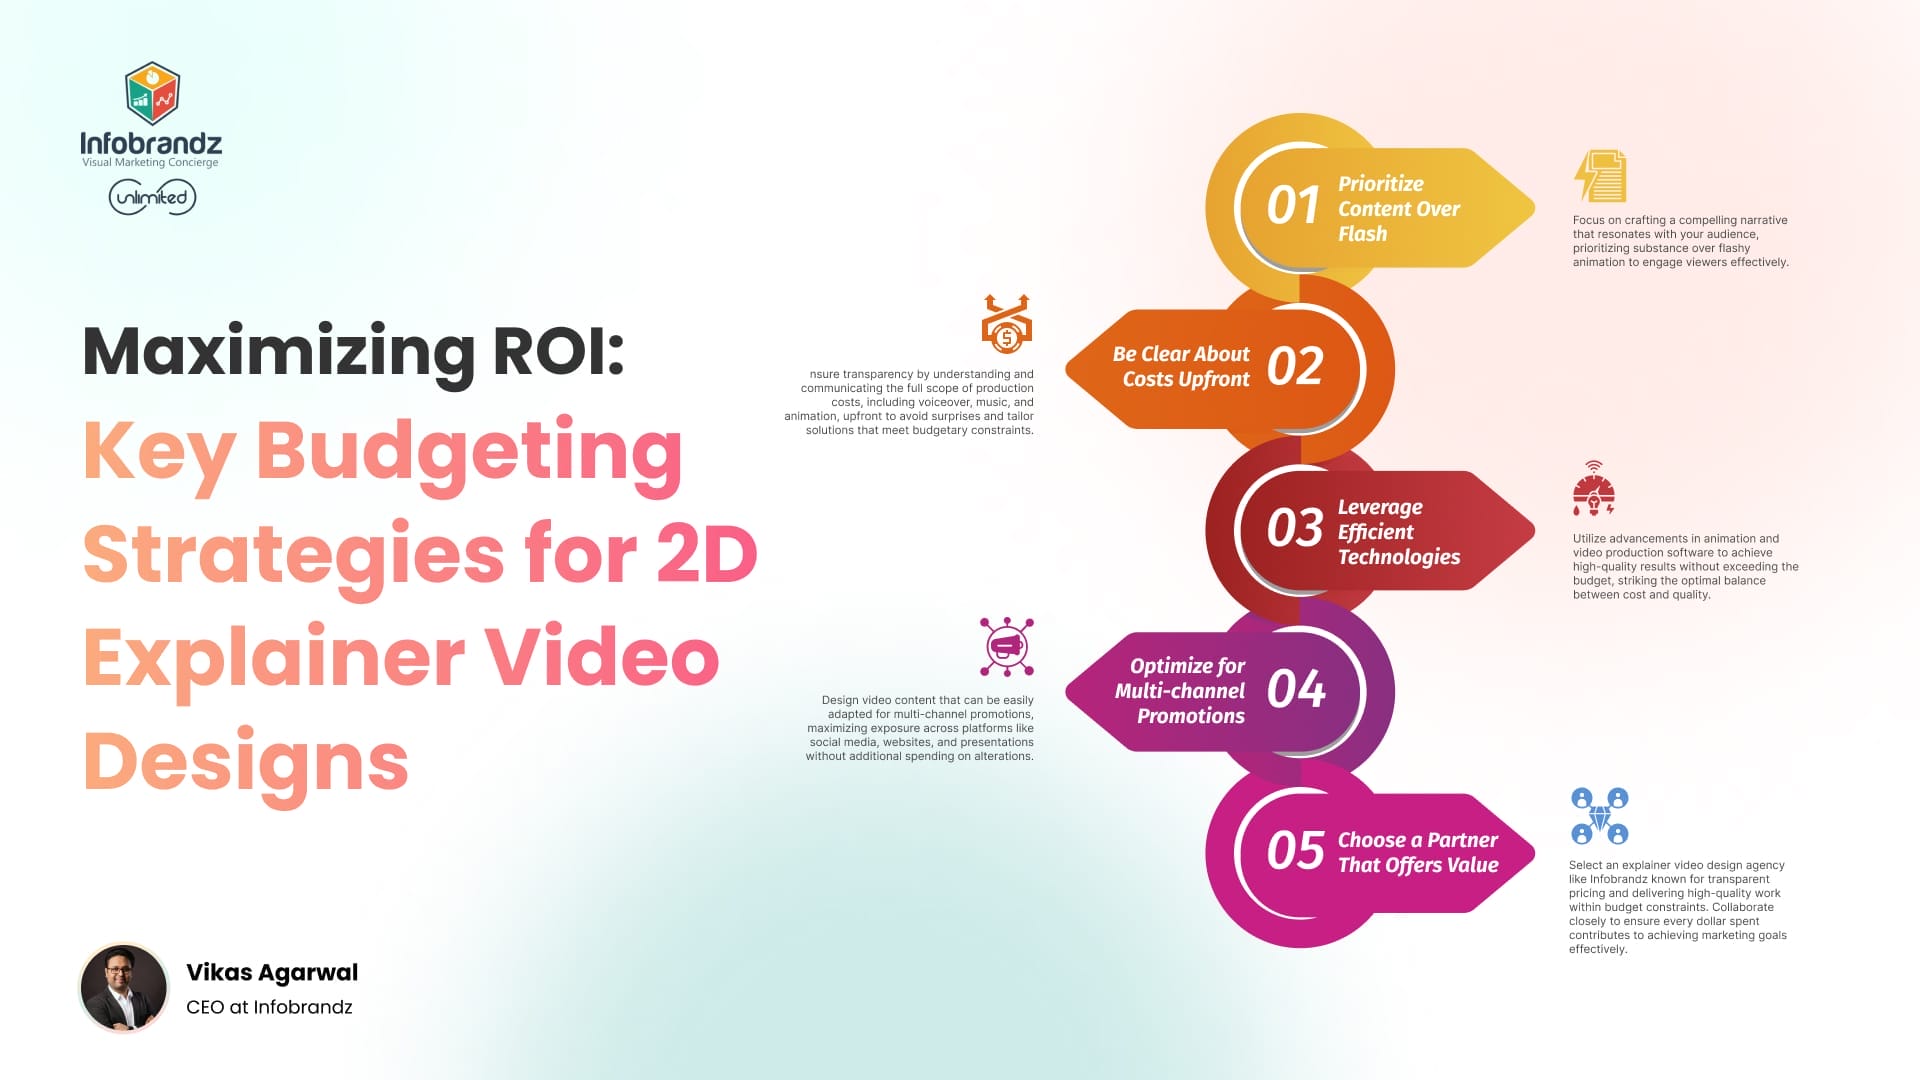 Key Budgeting Strategies for 2D Explainer Video Designs